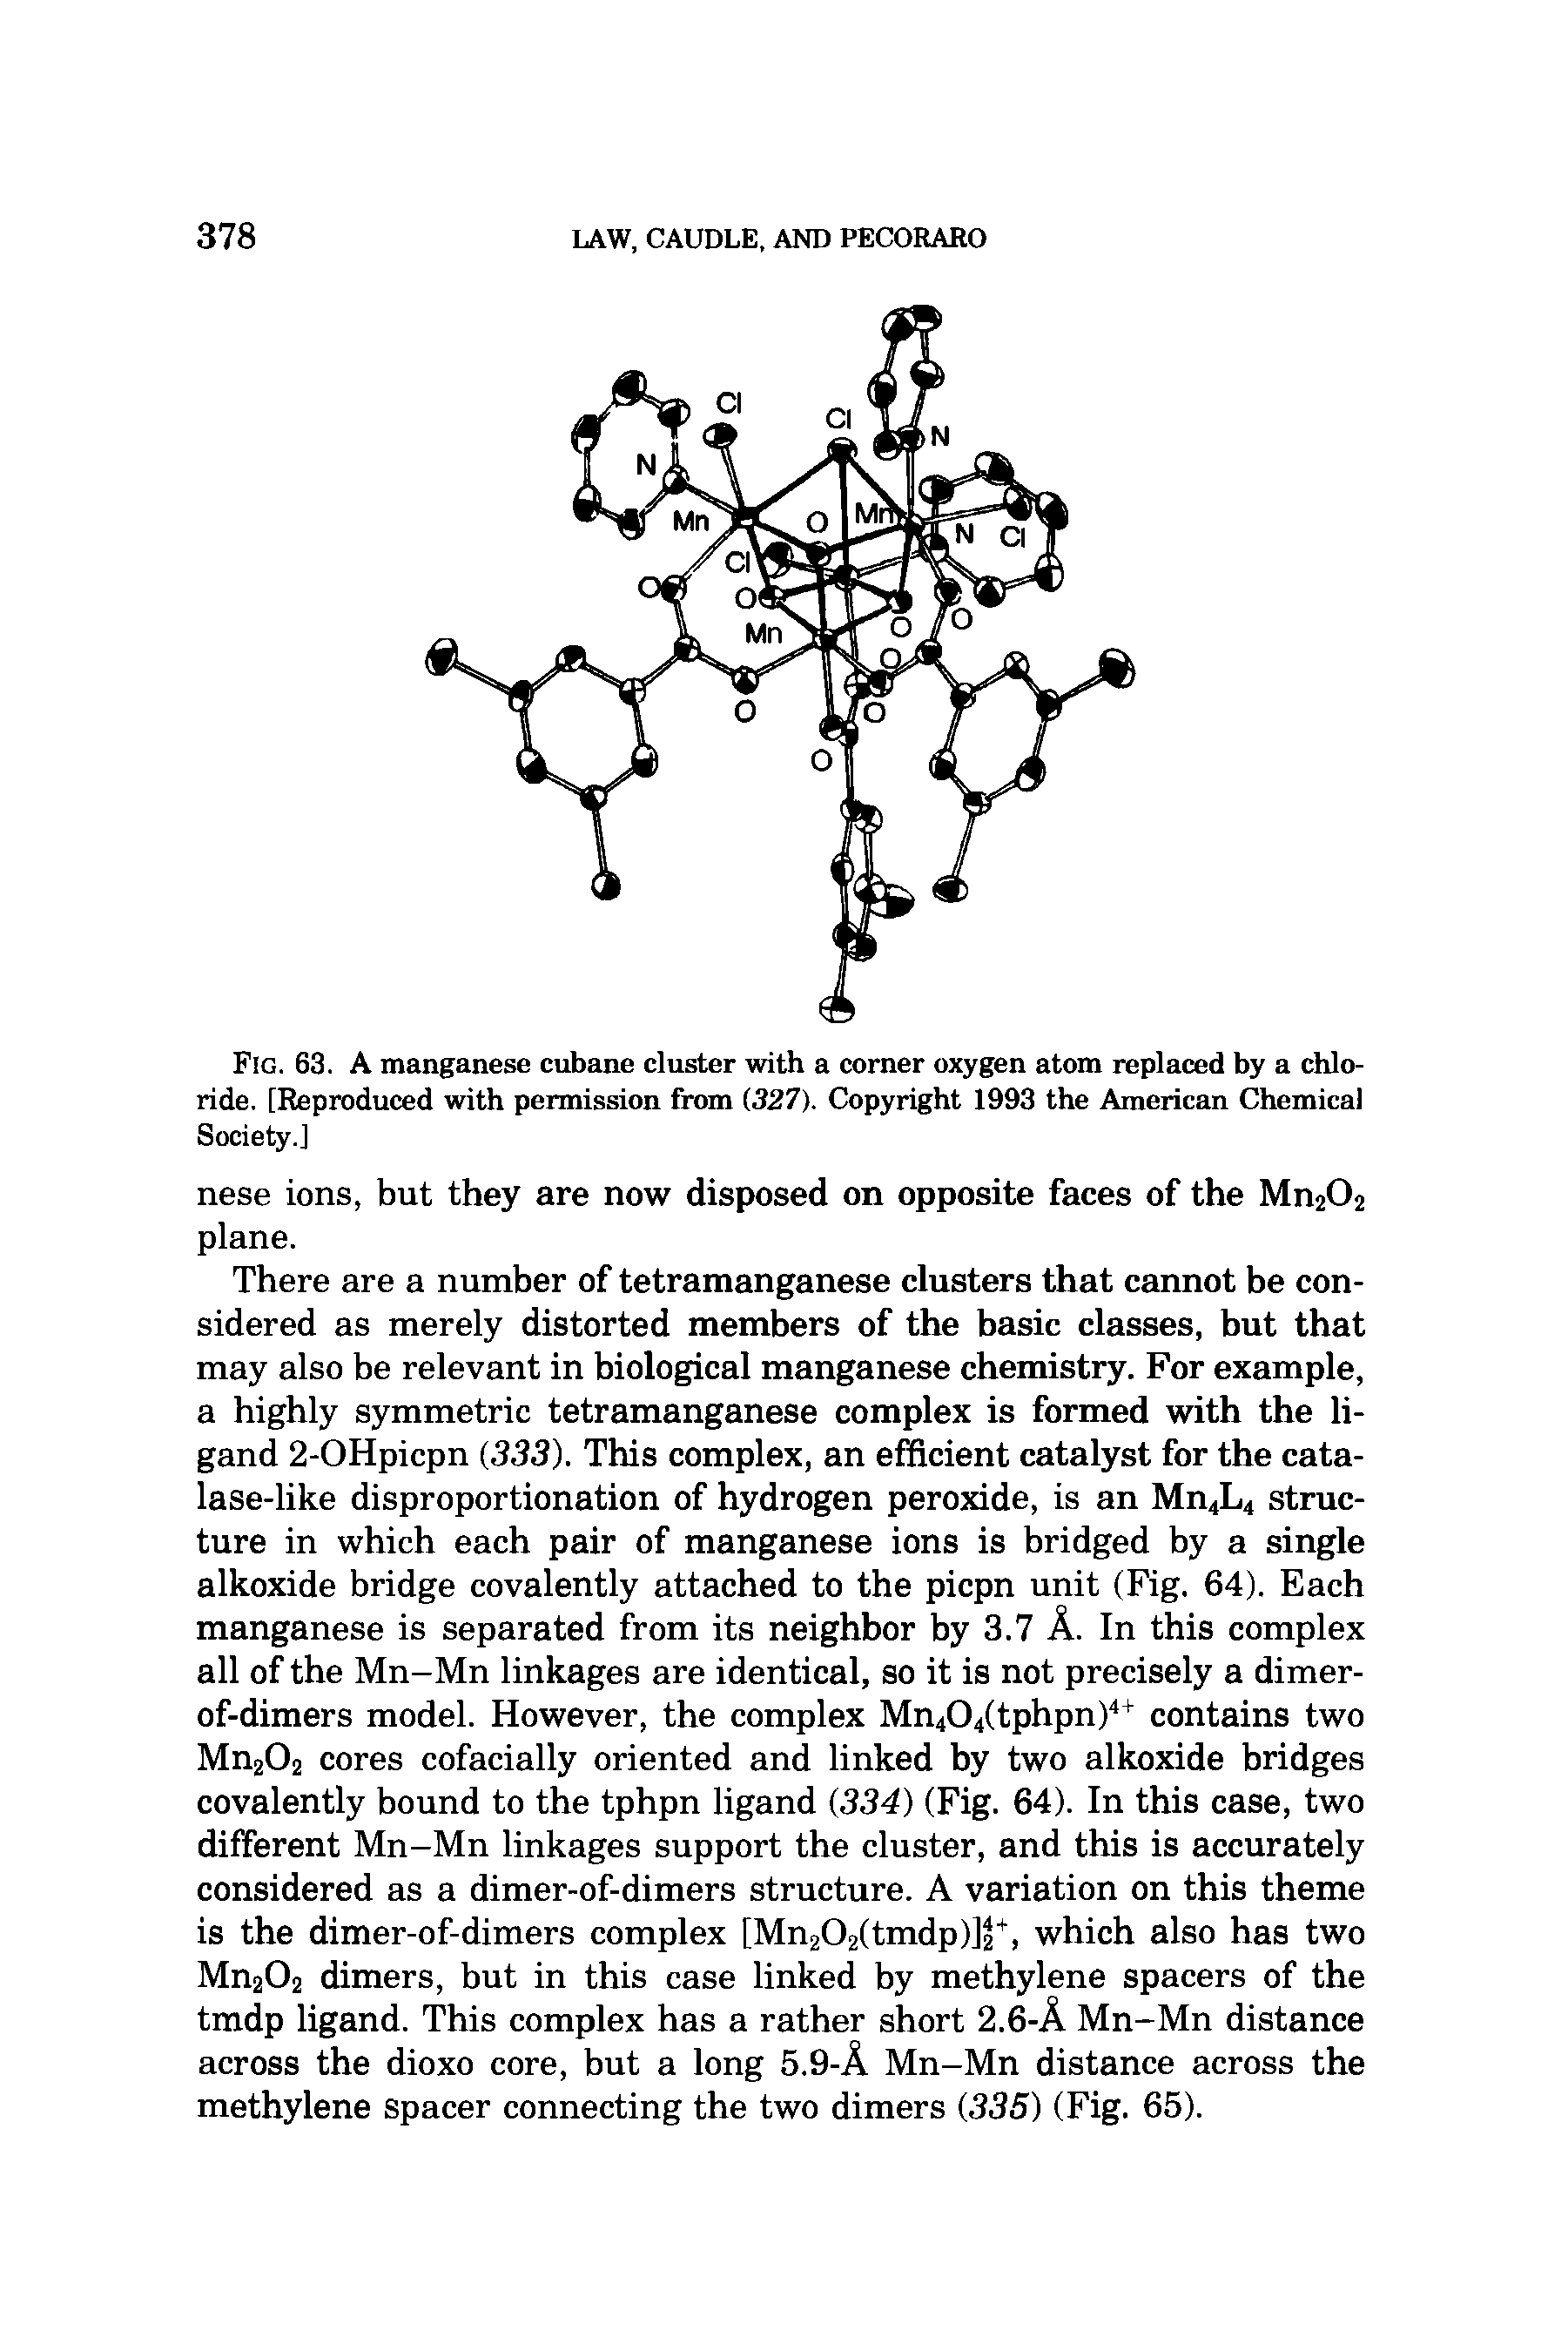 Fig. 63. A manganese cubane cluster with a corner oxygen atom replaced by a chloride. [Reproduced with permission from (327). Copyright 1993 the American Chemical Society.]...